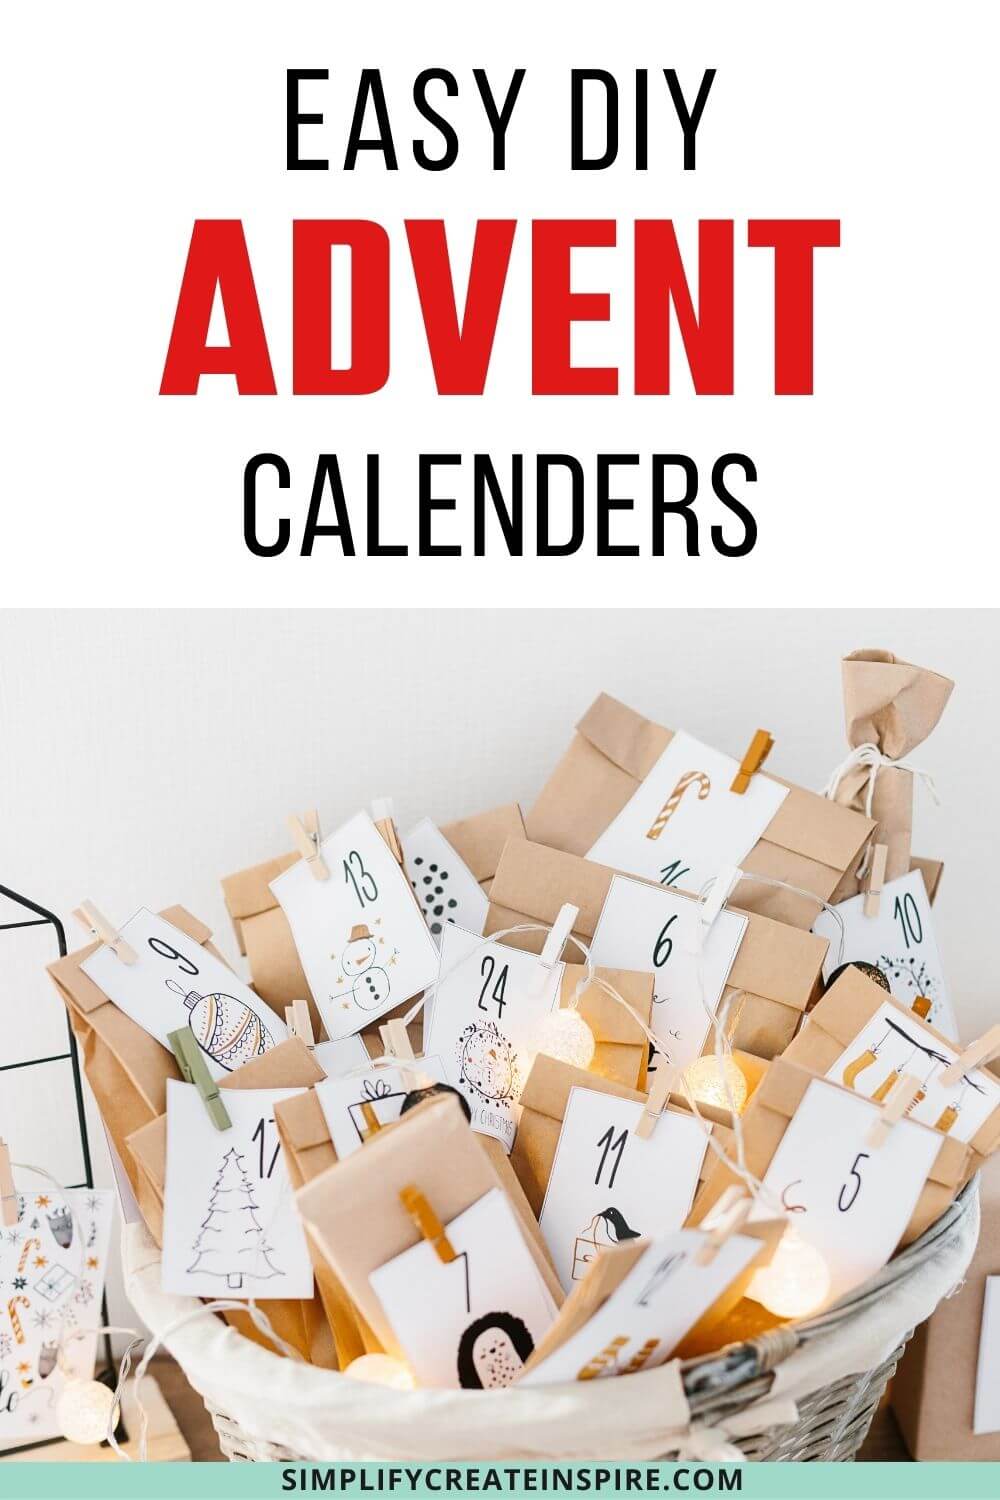 The Best Diy Advent Calendar Ideas For Kids And Adults Simplify Create Inspire